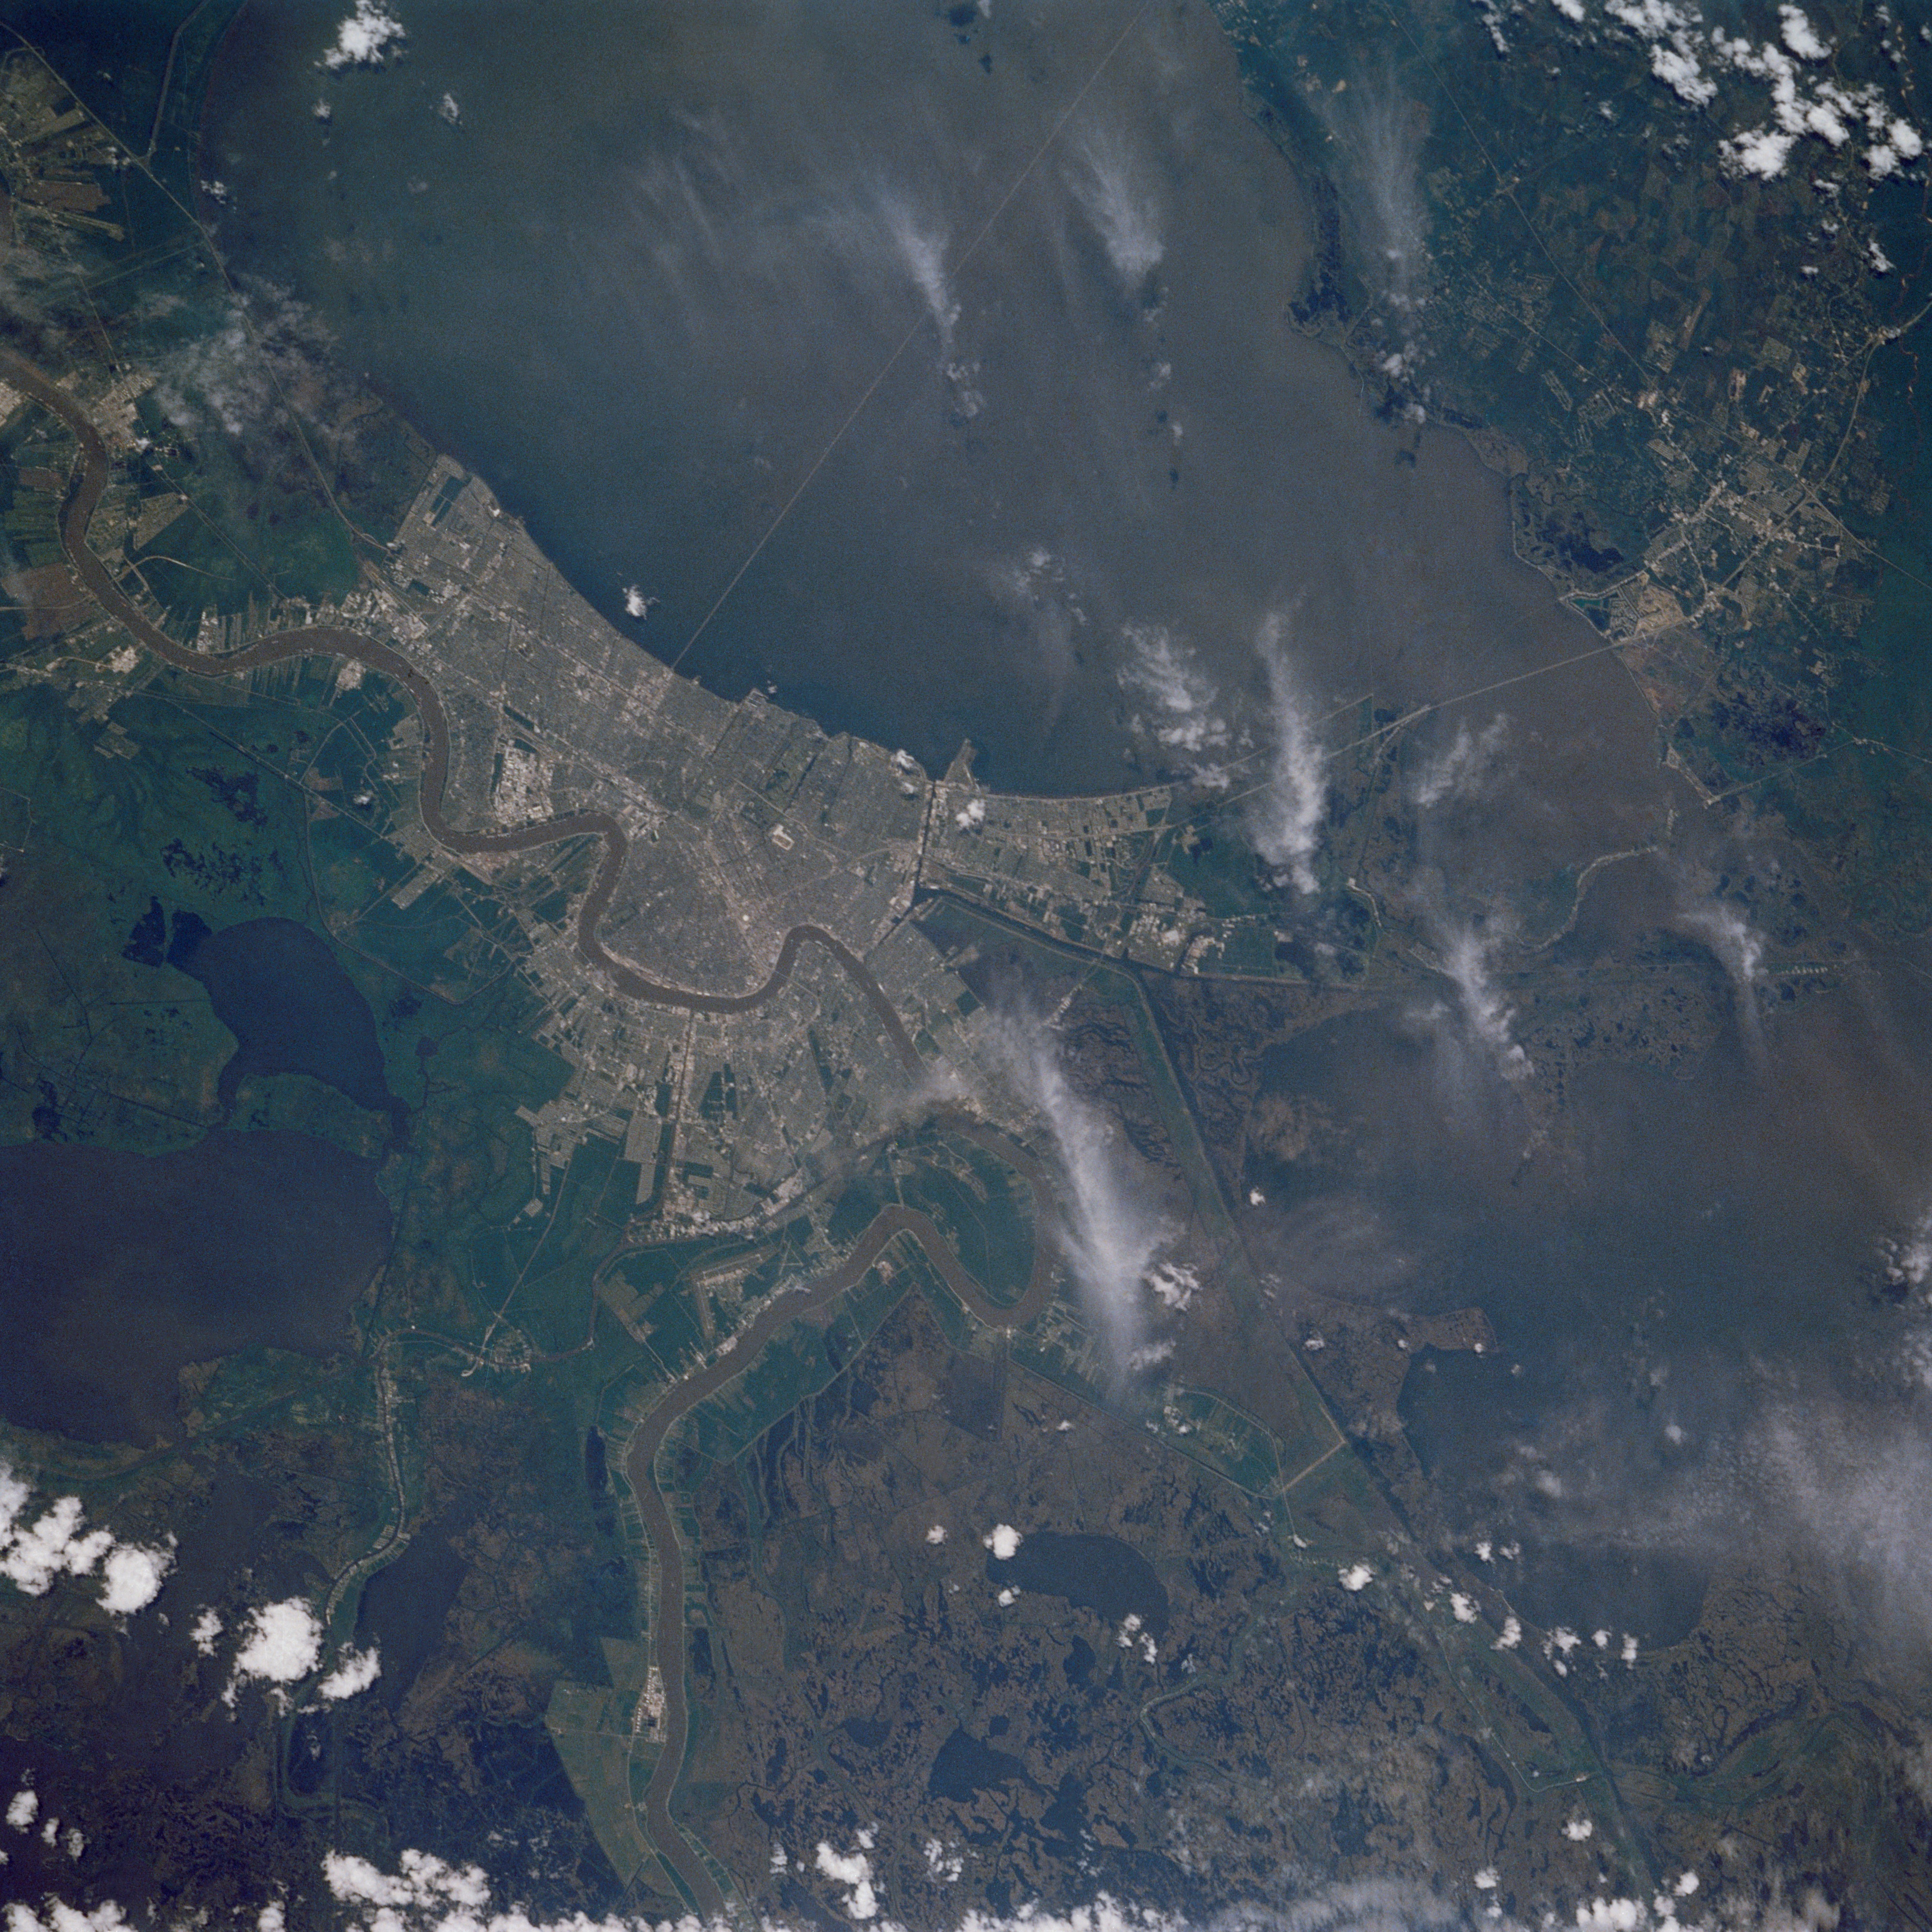 STS-30 crew Earth observation photograph of New Orleans